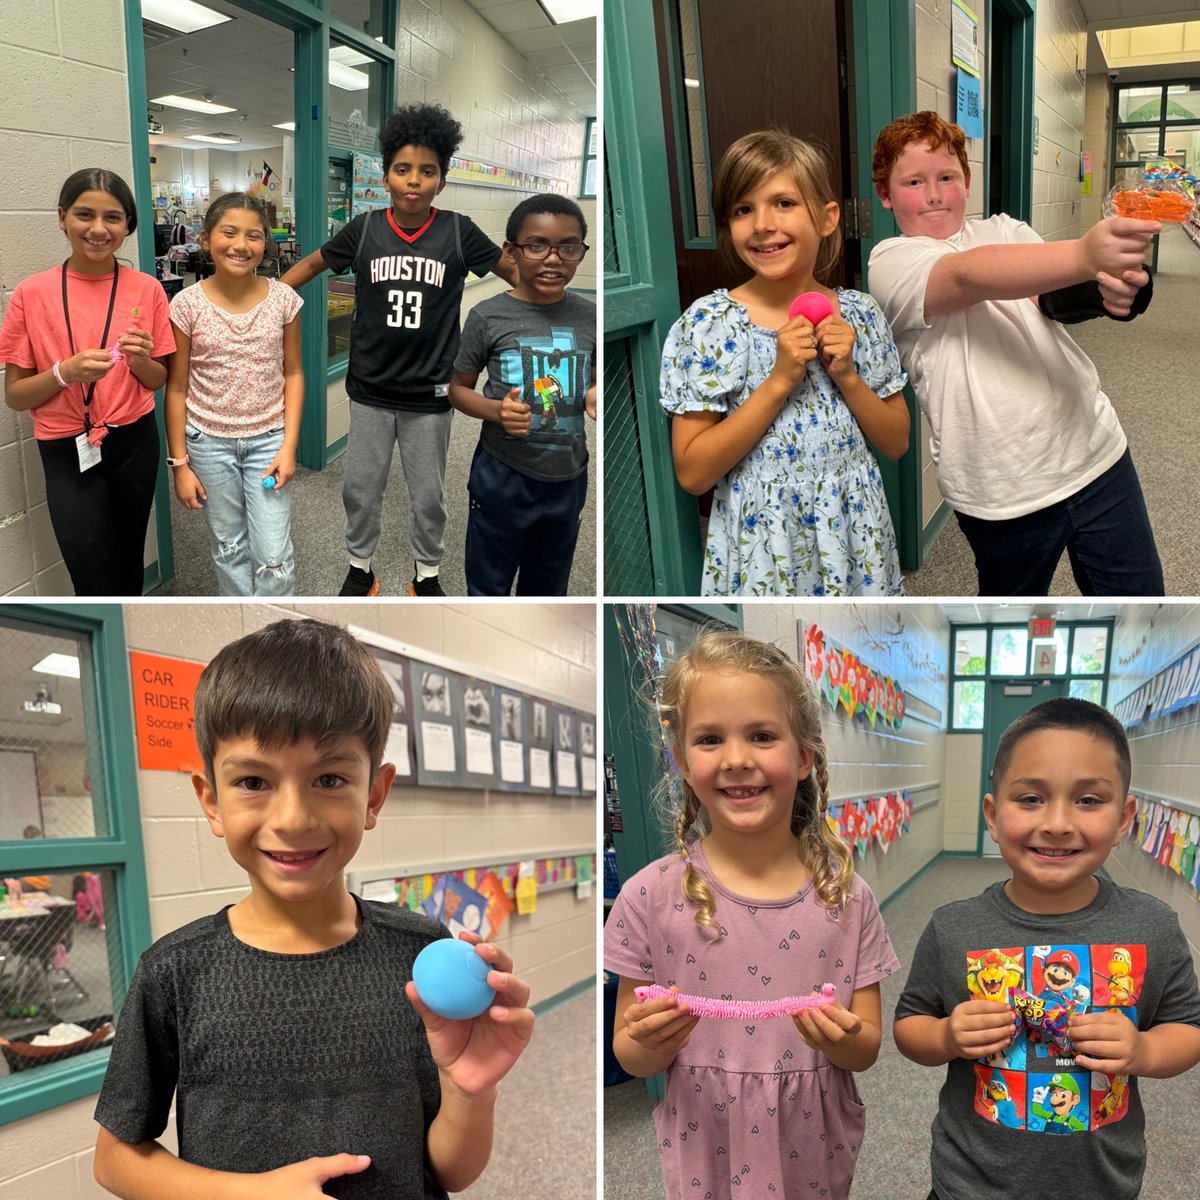 Super proud of our Silver Ticket Winners for the week! Here are some happy faces that got to select a prize of their choice! Keep up the awesome work 🐻s! @HumbleISD_MBE @HumbleISD_CBS #shinealight #senditon #mbeisfamily #WeAreTheLight #nextkidup #HumbleISDFamily @HumbleISD